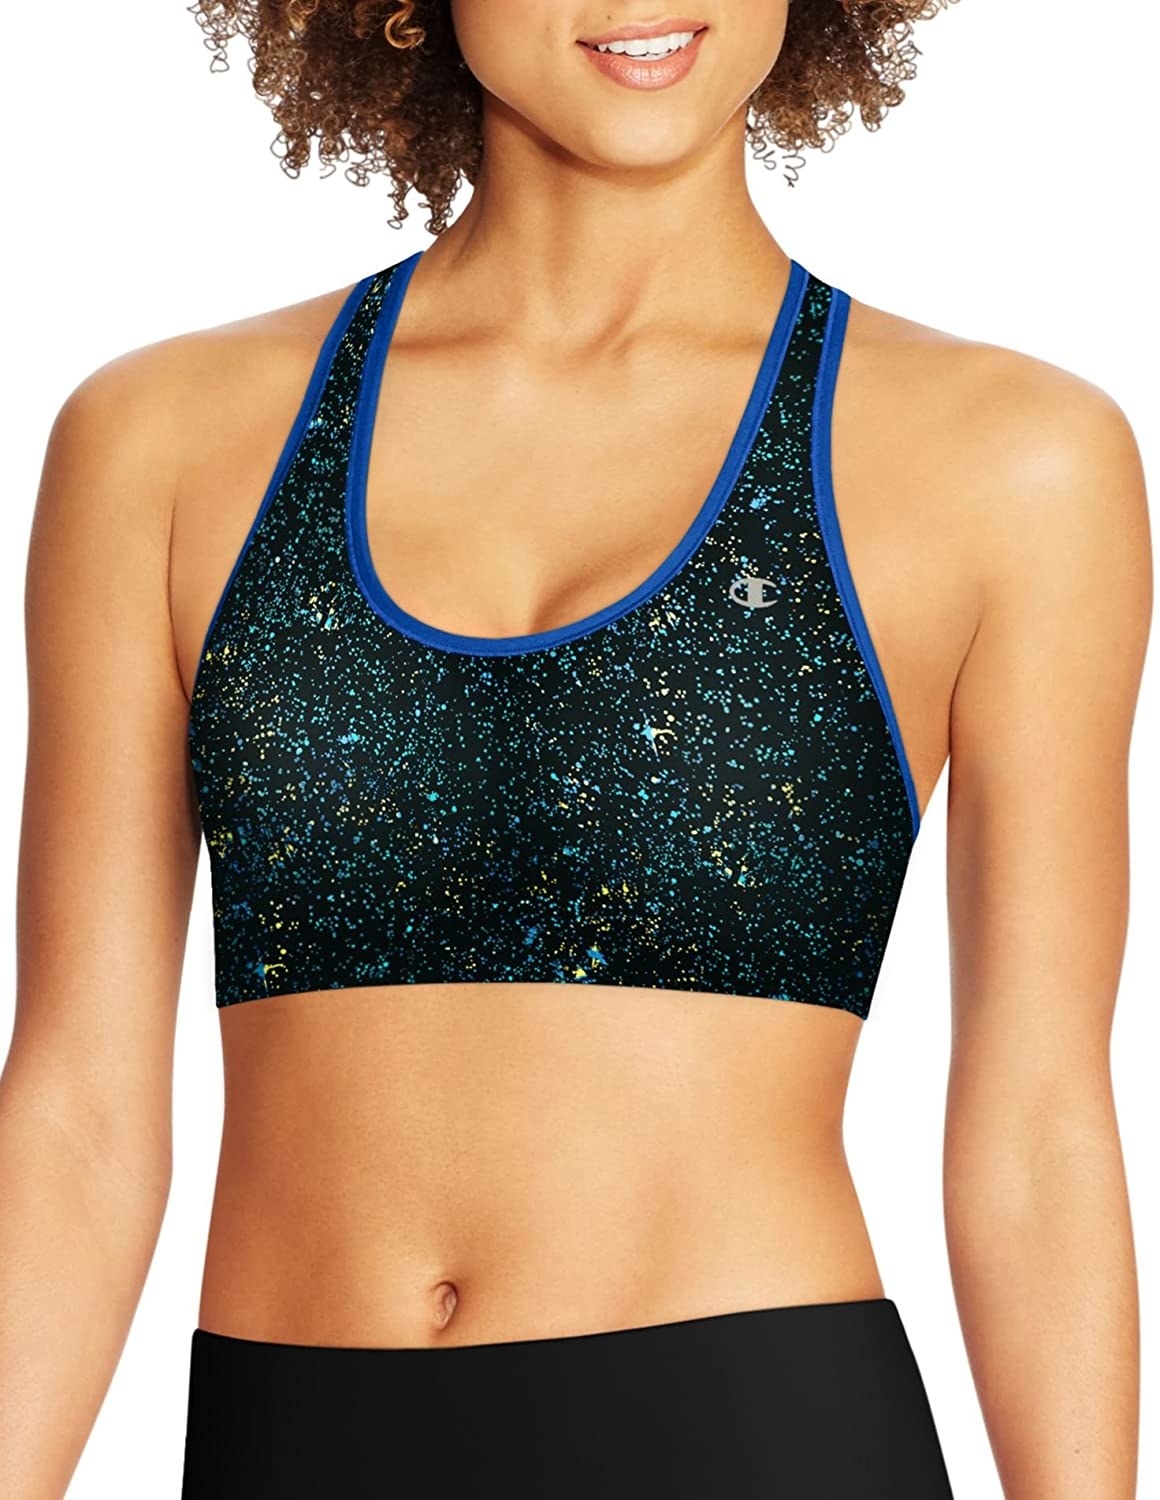 model wears black sports bra with blue and gold speckled design throughout